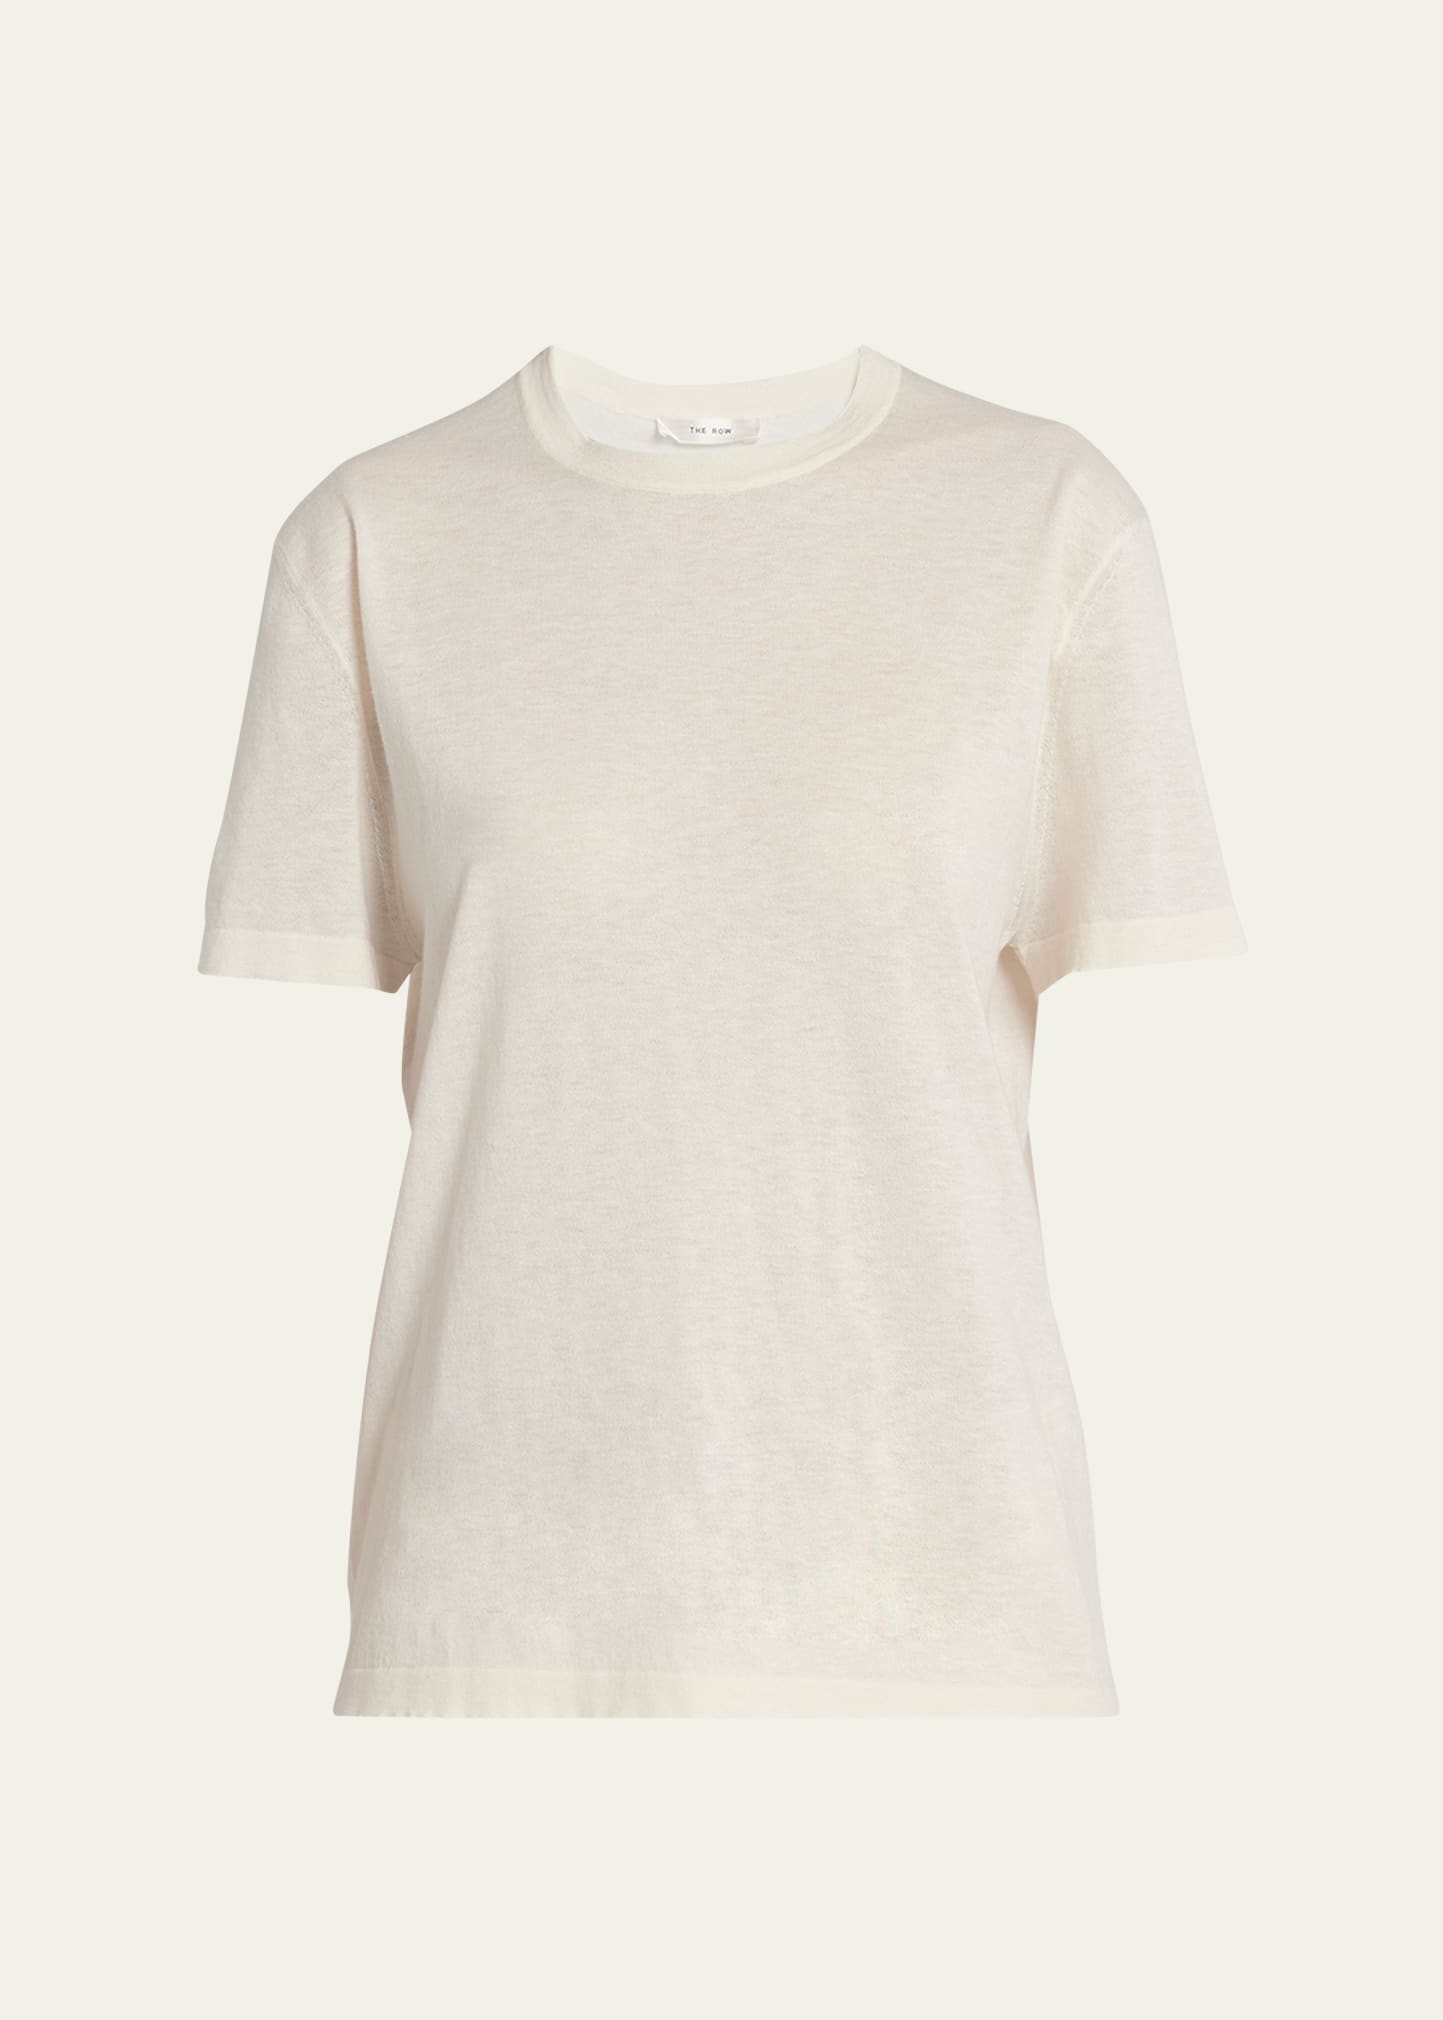 Shop The Row Fayola Cashmere Top In Ivory